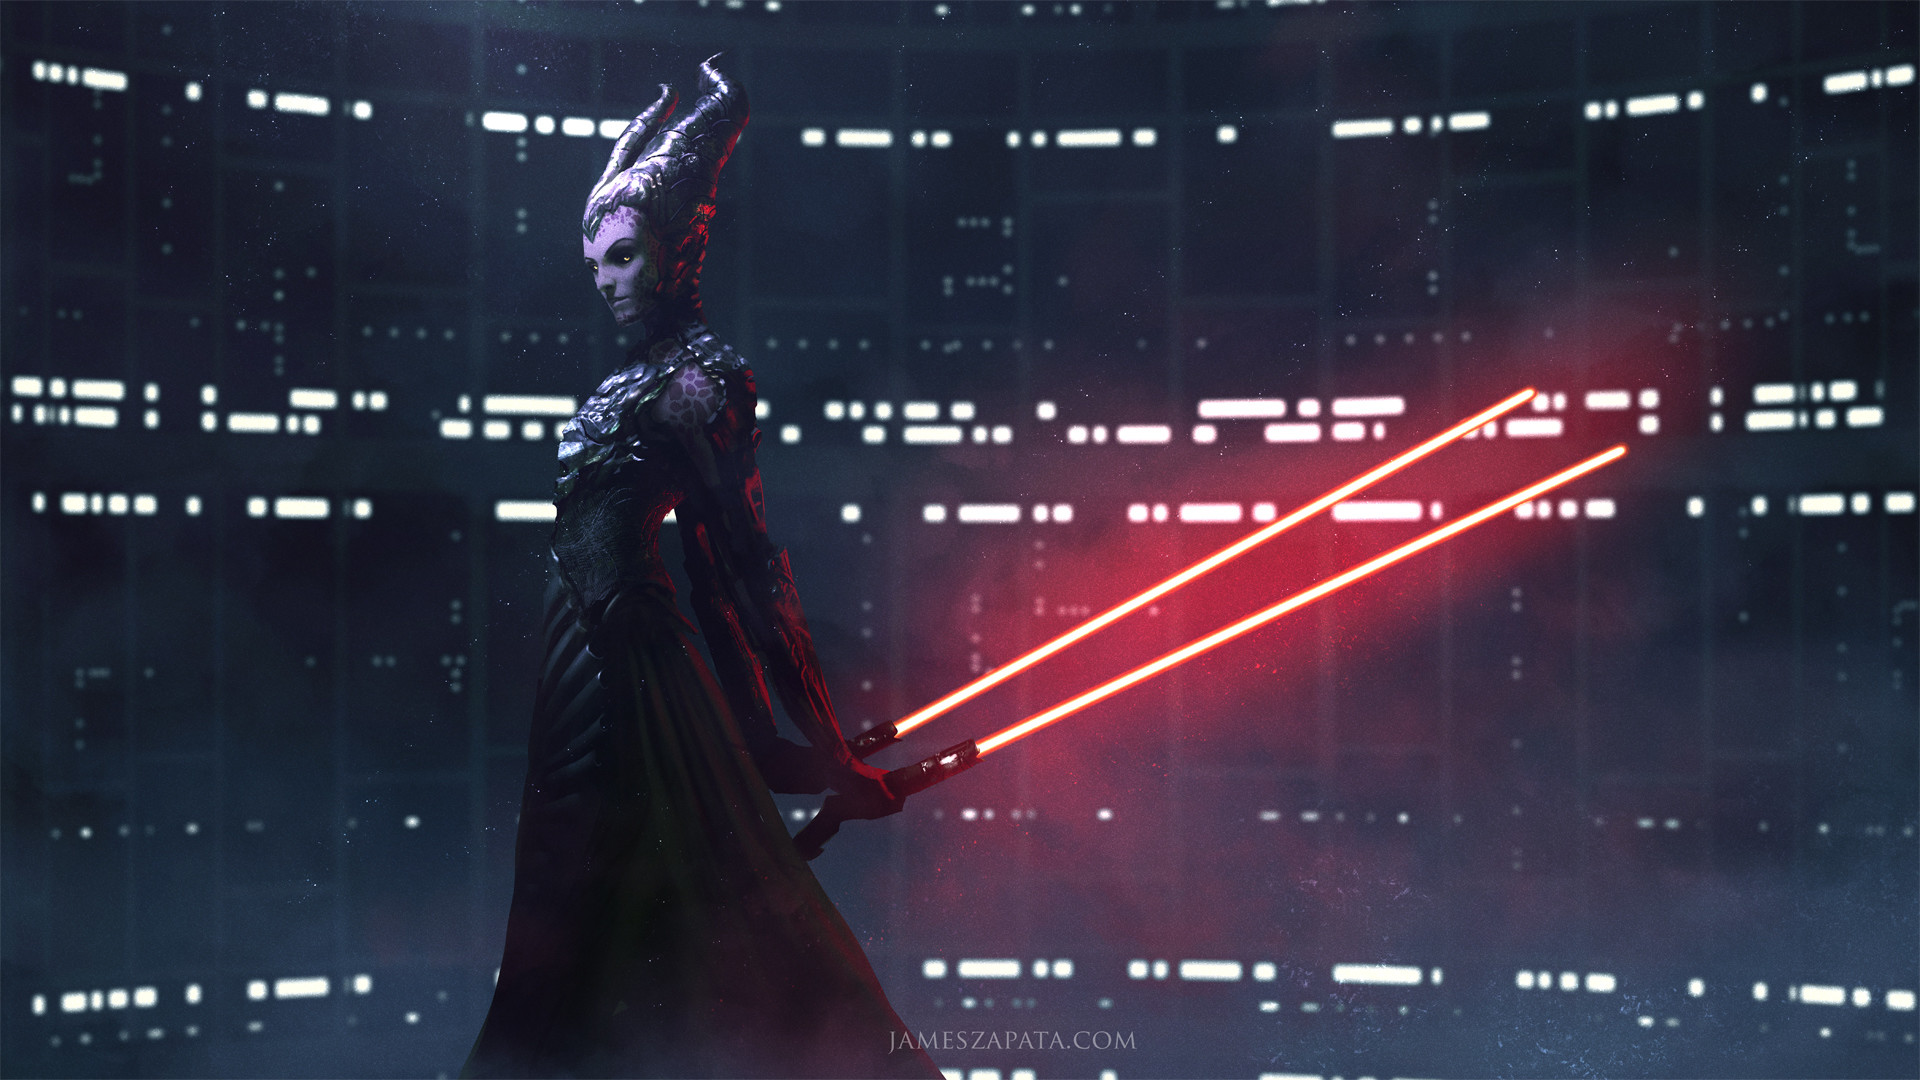 1920x1080 Darth Maleficent wallpaper. Maleficent Sith Lord red lightsabers, Star Wars